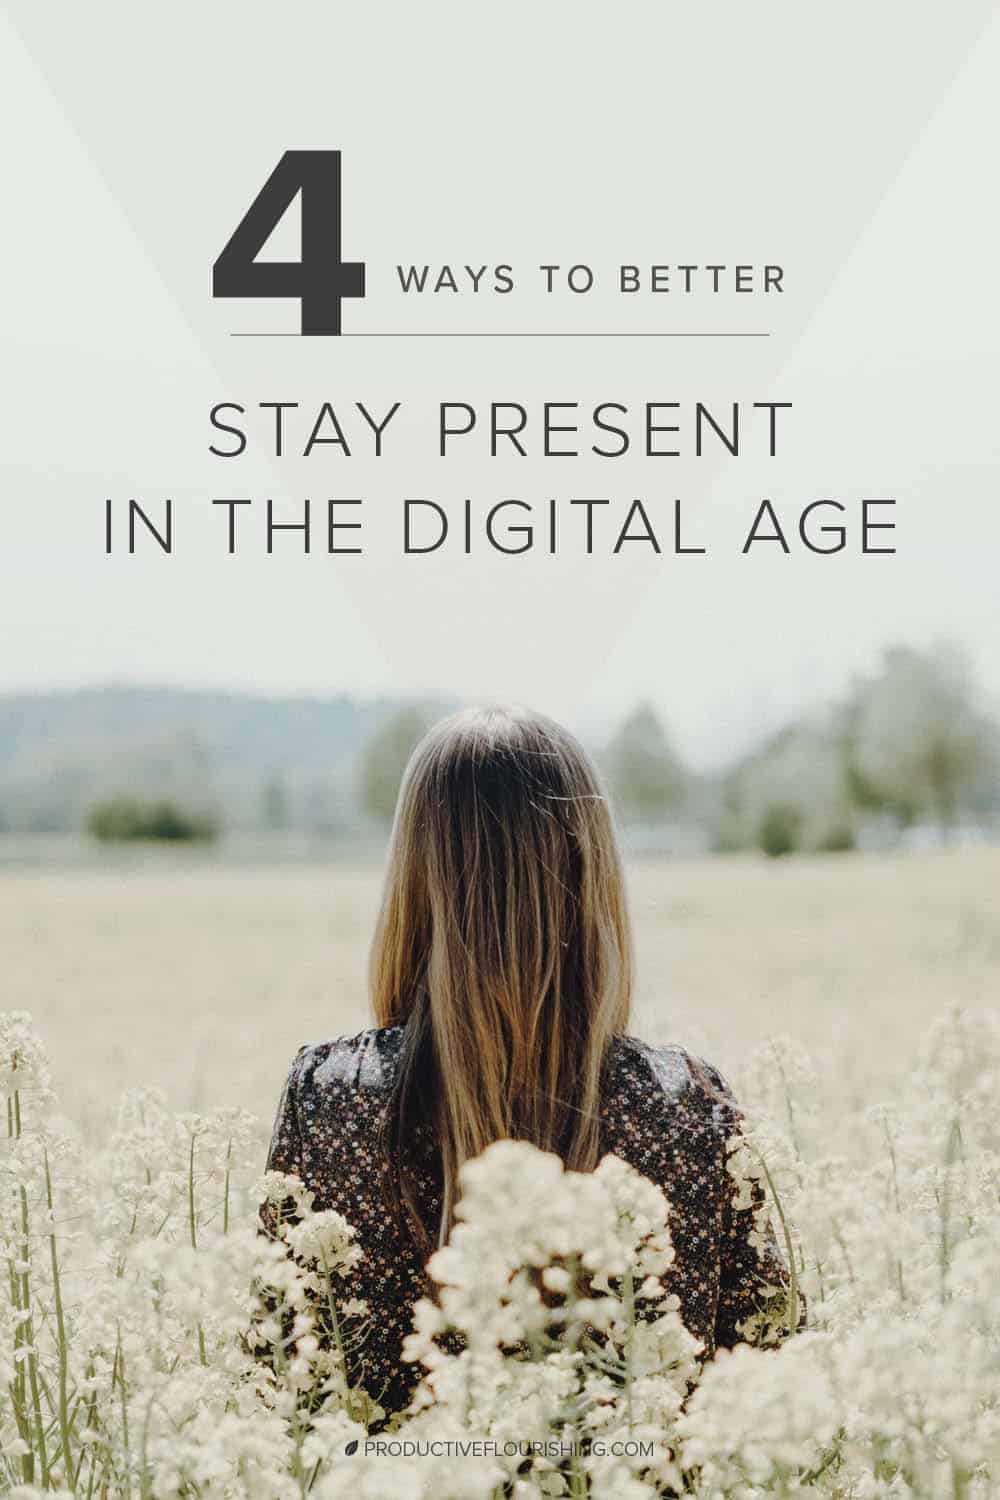 4 Ways to Better Stay Present in the Digital Age. Here are some wonderful ways to stay present in the digital age. Despite the hundreds of “friends,” we feel more disconnected from others than ever before. I’m not anti-technology, but I am a firm believer in practicing intentionality. #technologydisconnect #stayingpresent #productiveflourishing